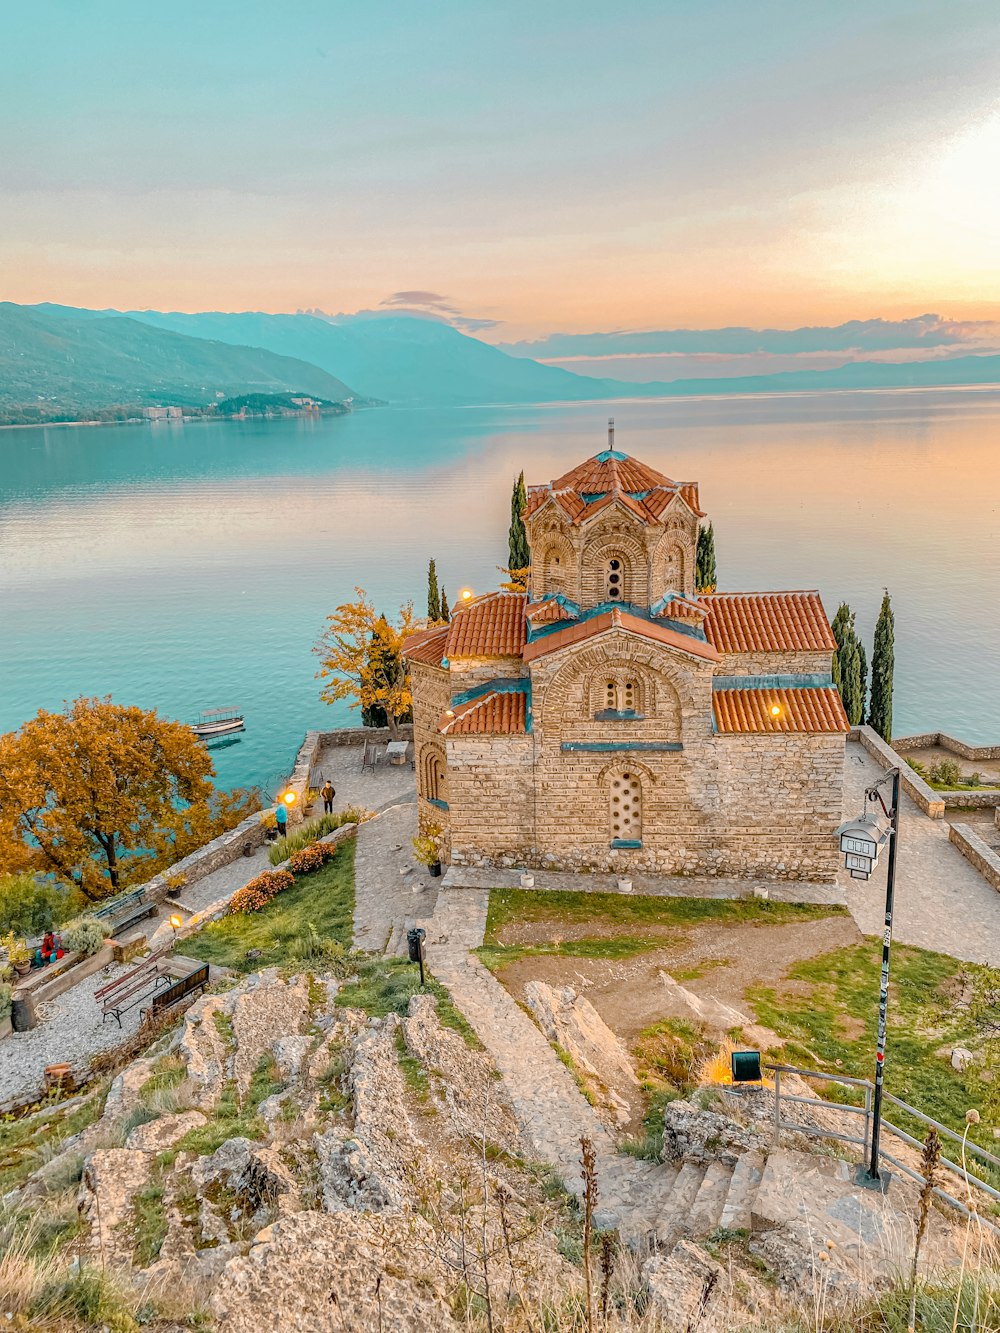 a church on a hill overlooking a body of water